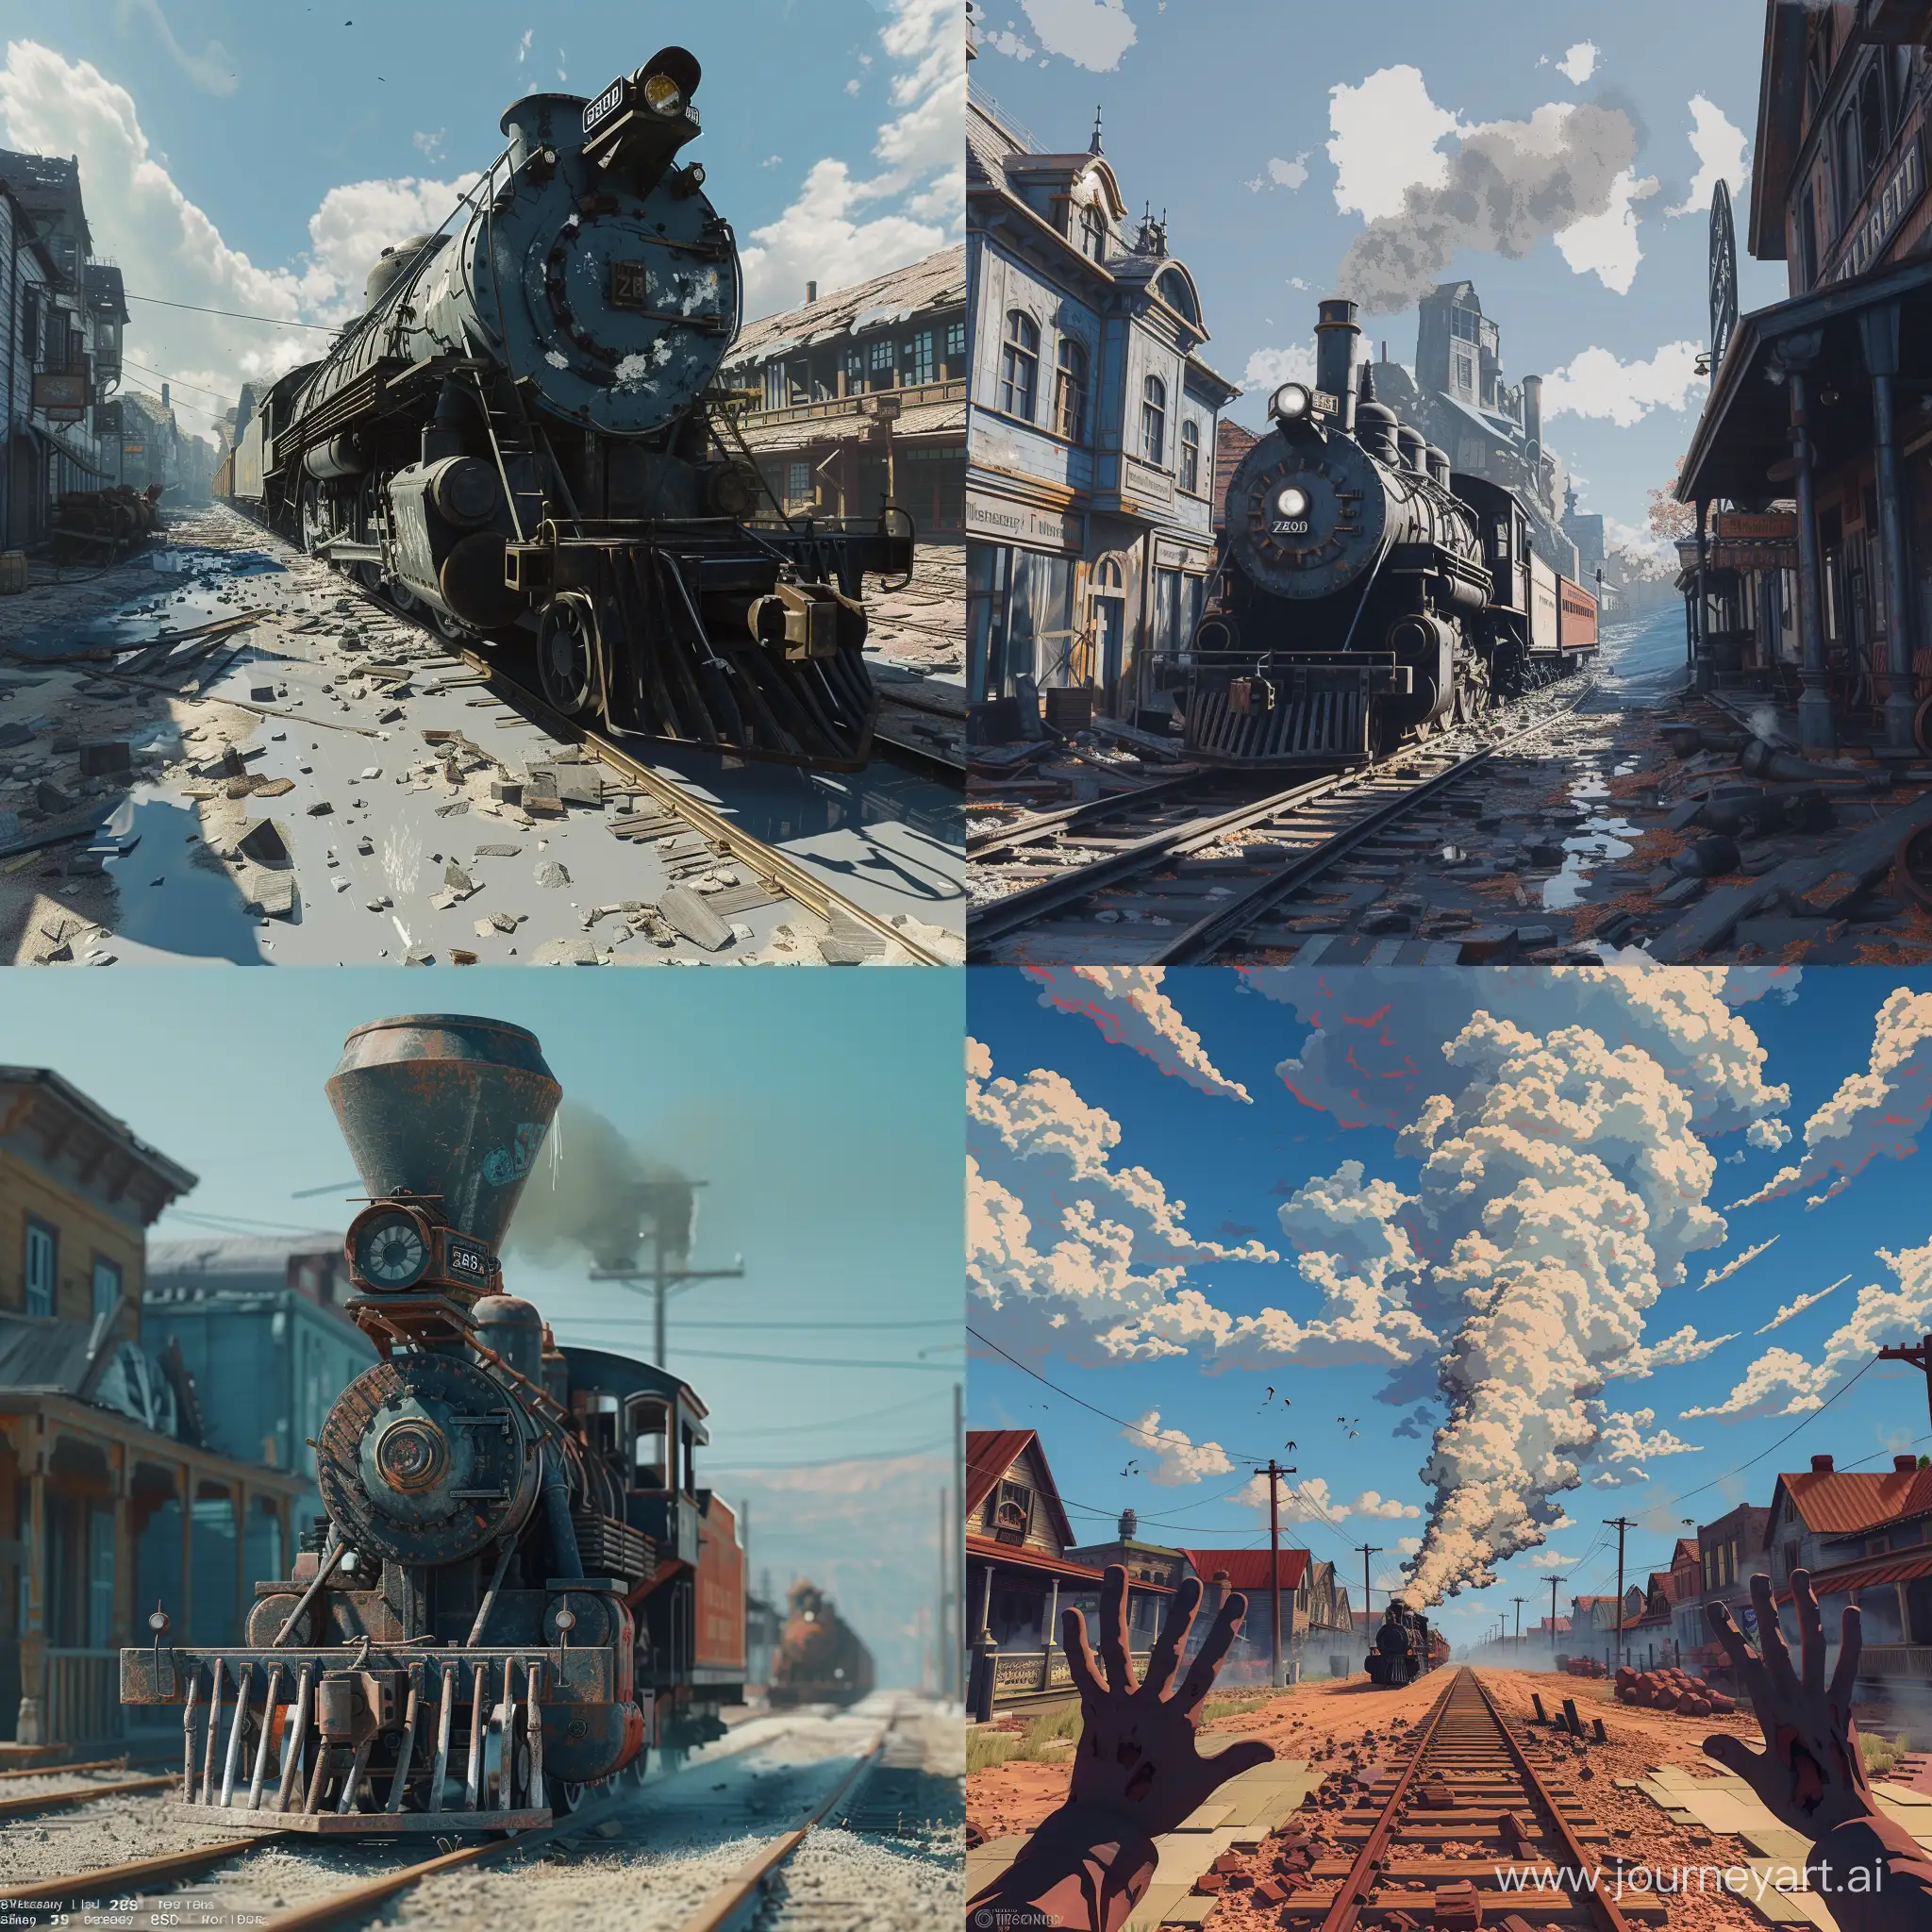 Sunlit-Steam-Locomotive-in-a-Detailed-Townscape